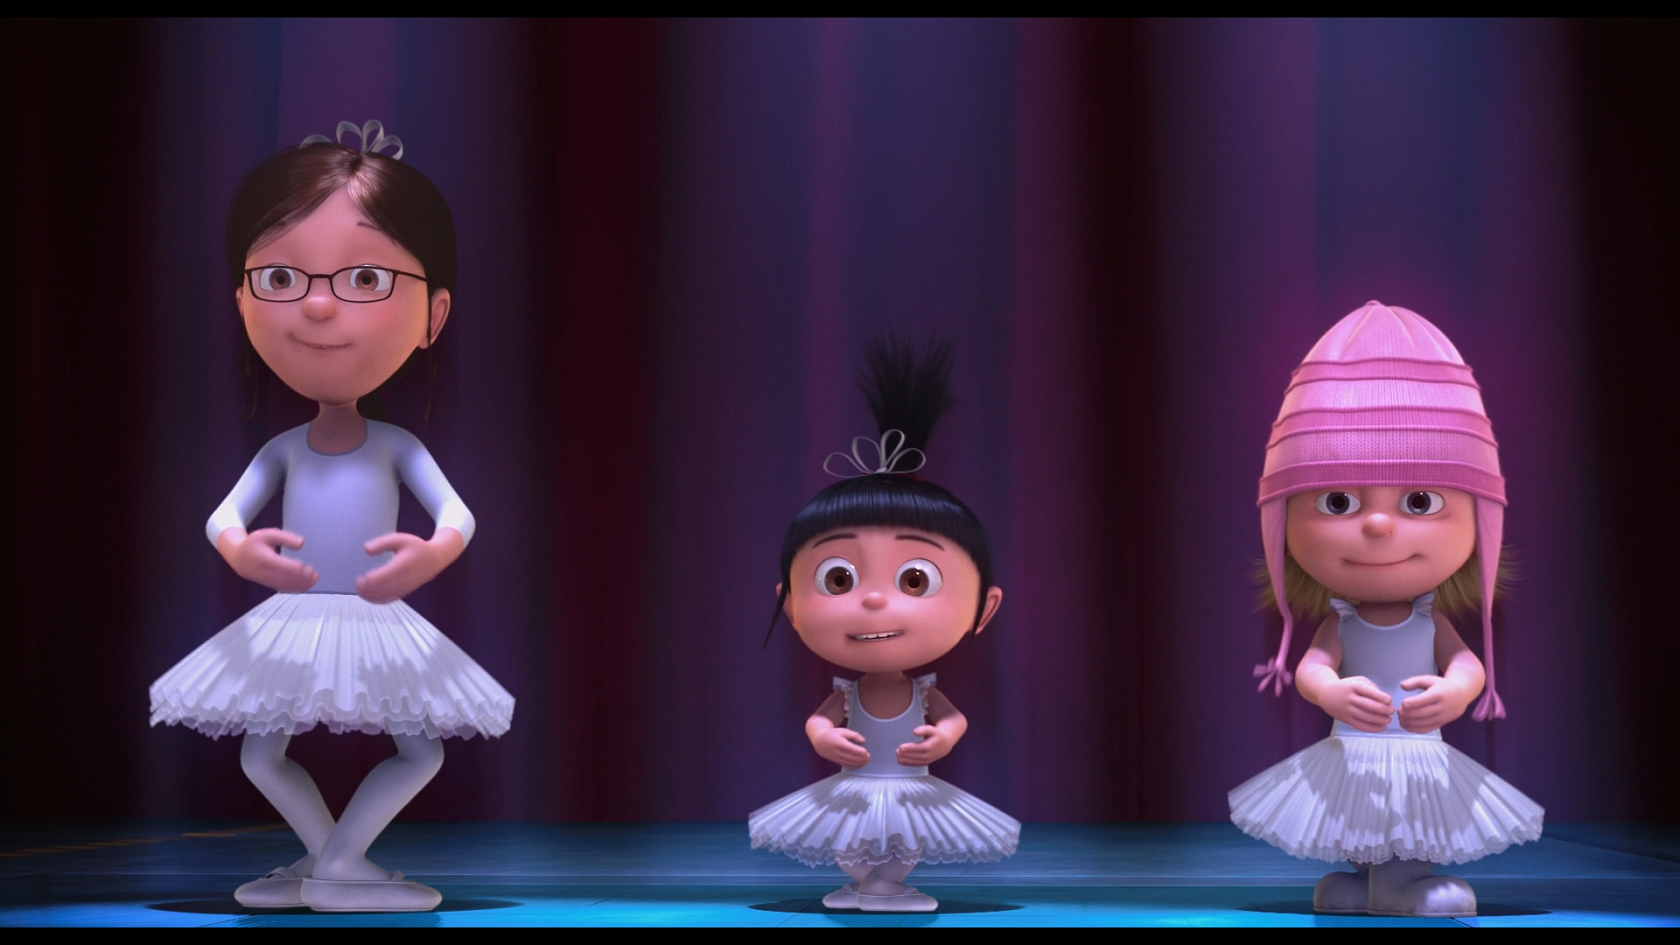 http://static3.wikia.nocookie.net/__cb20130721200629/despicableme/images/9/9c/Margo-agnes-edith-despicable-me-2.png